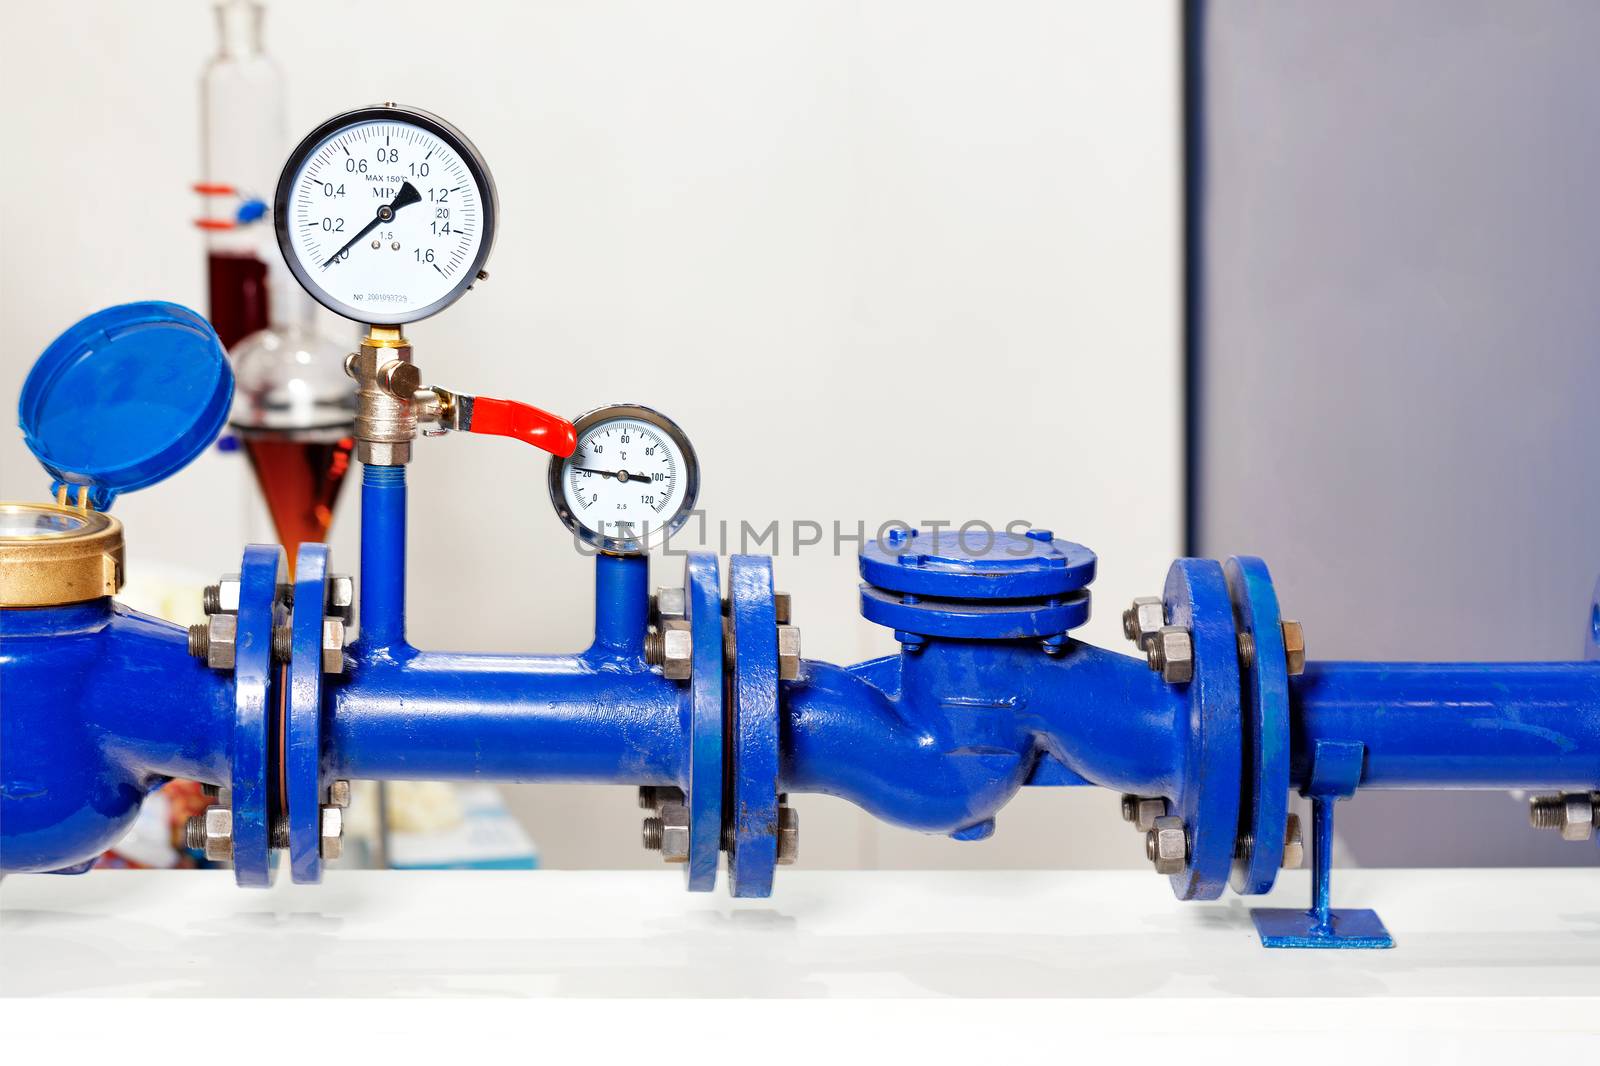 Water metering and pressure system using manometers, close-up. by Sergii